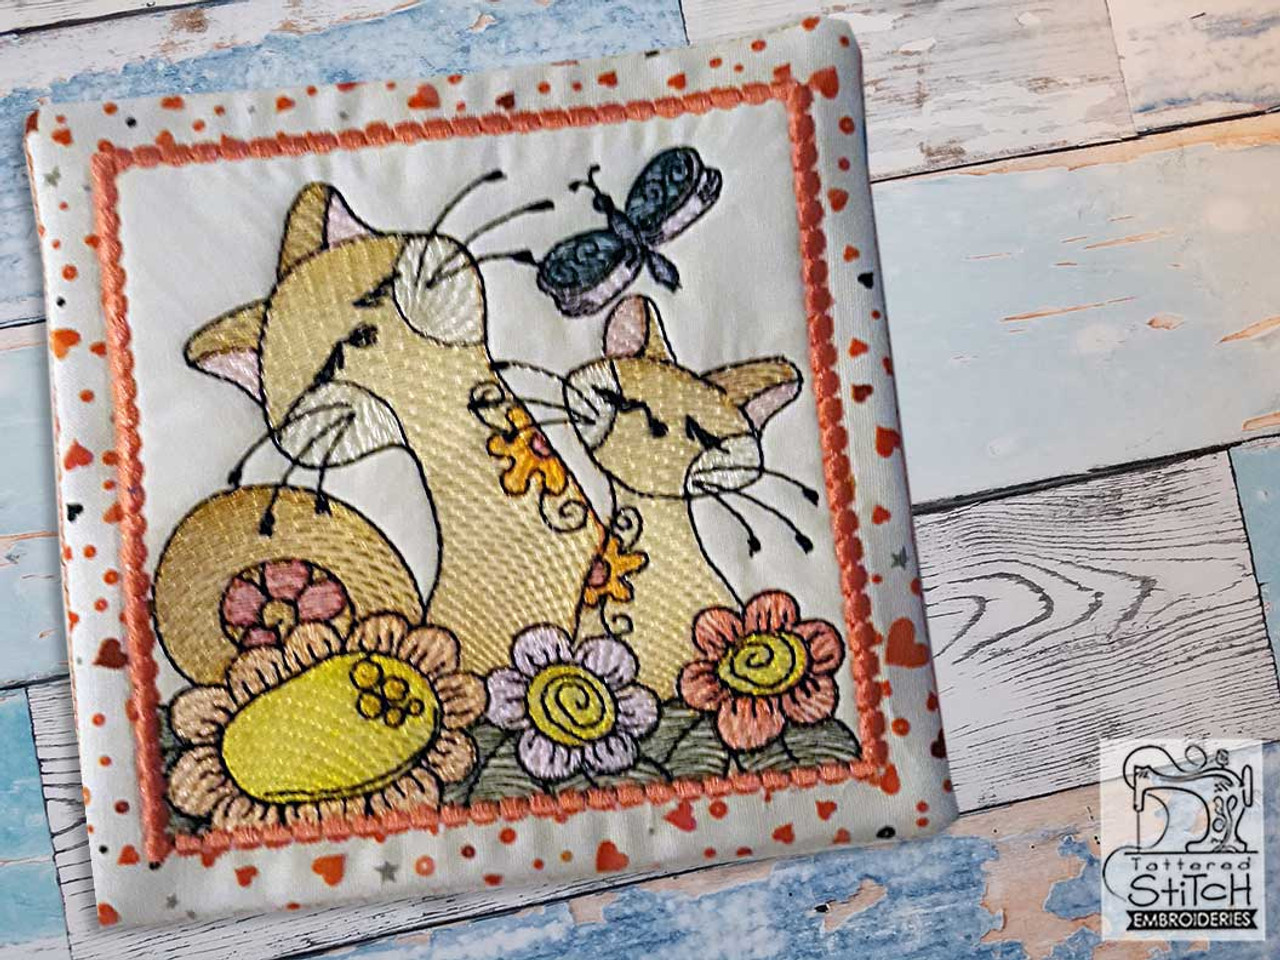 Download 2 Cats Mug Rug Fits A 5x7 Hoop Machine Embroidery Designs Tattered Stitch Embroideries